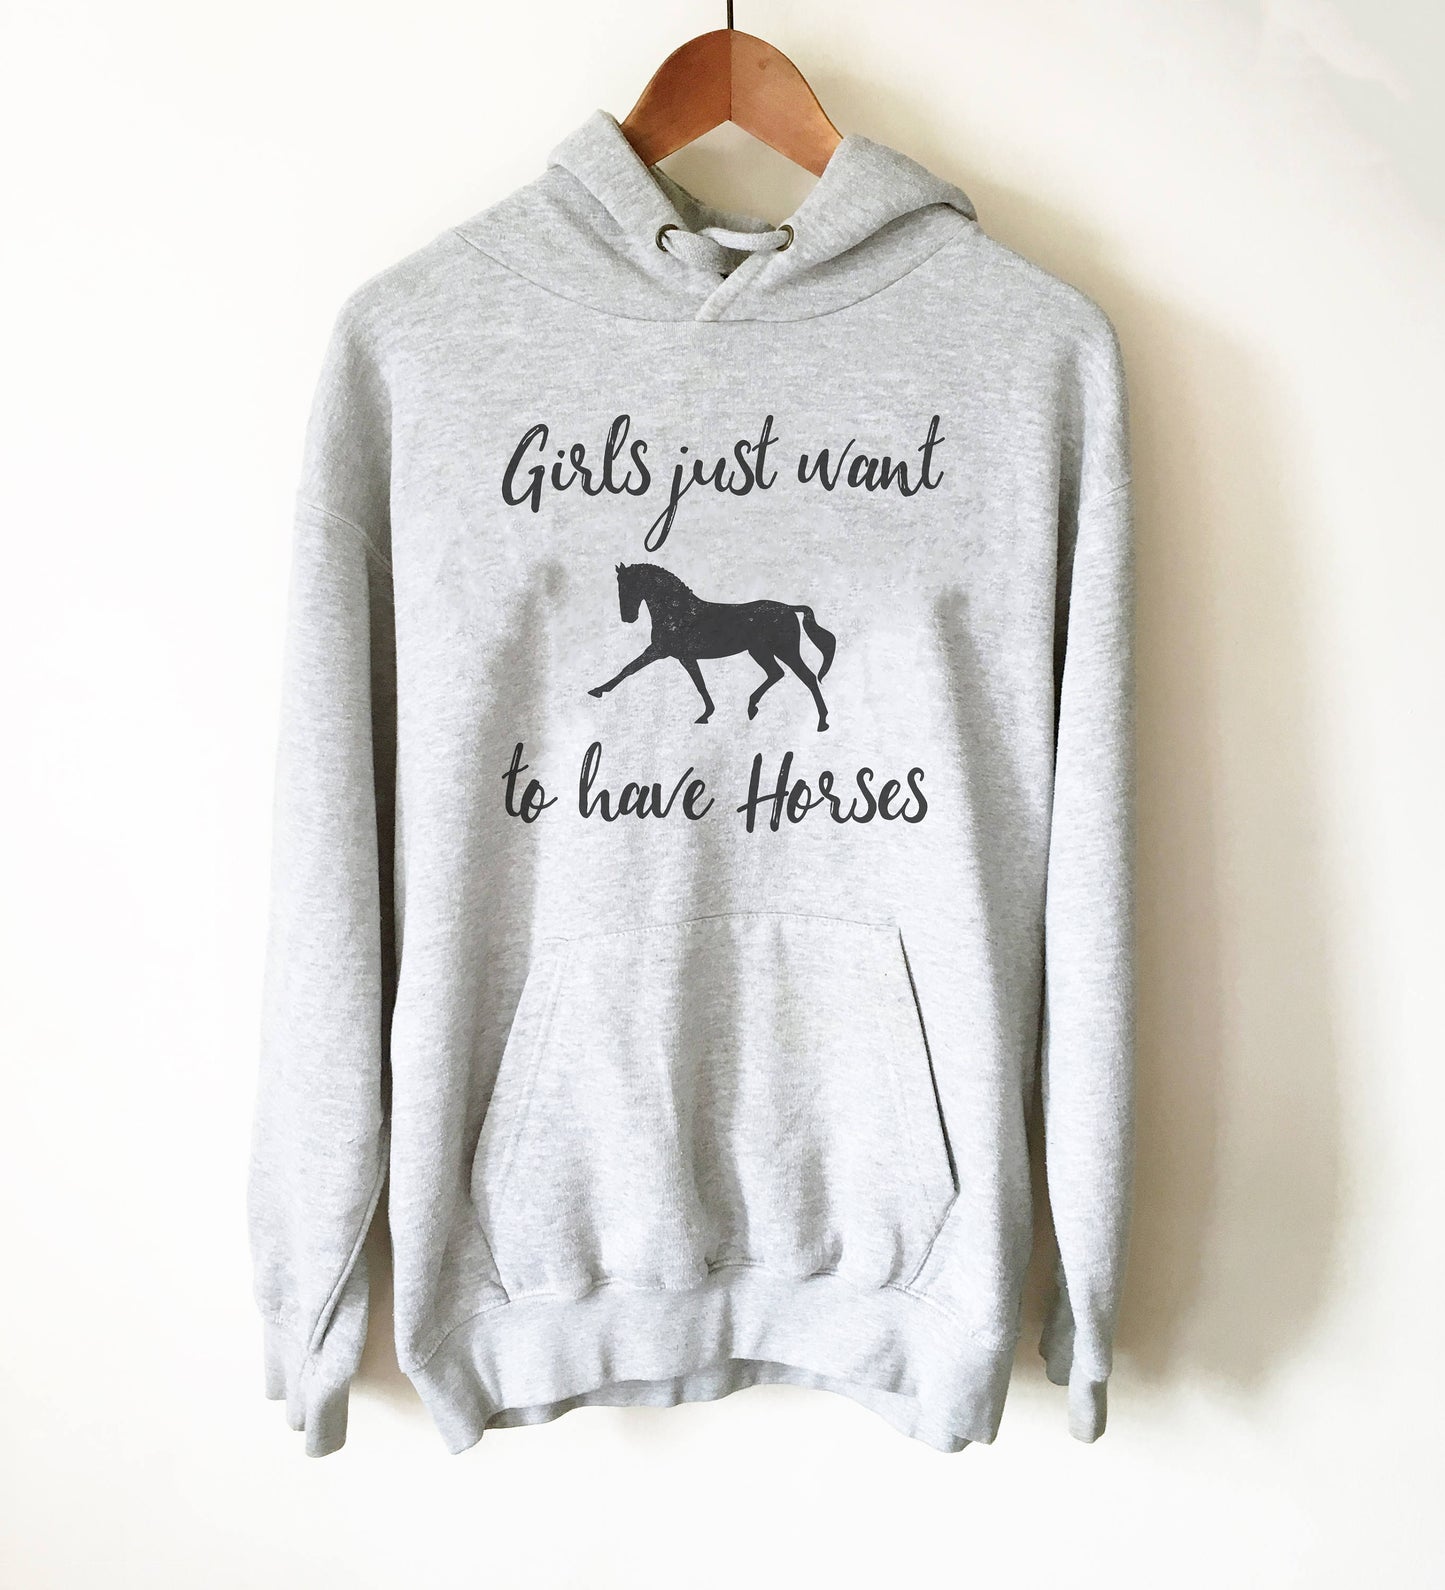 Girls Just Want To Have Horses Hoodie - Horse Lover Gift, Country Shirt, Horse Lover, Southern Belle, Equestrian Gift